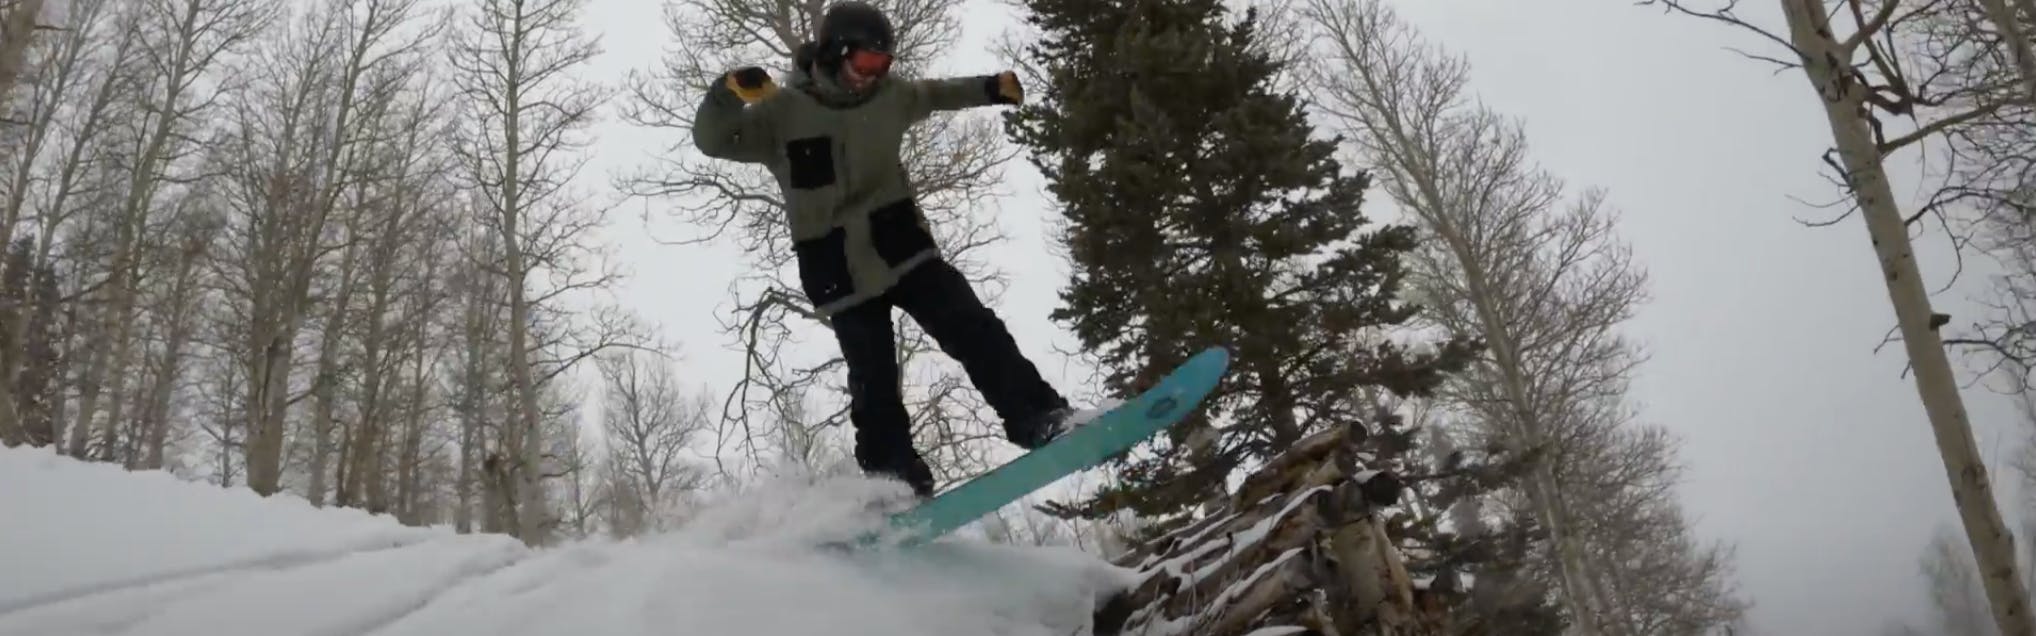 Curated Snowboard Expert Spencer Storck jumping with the 2023 Burton Daily Driver snowboard